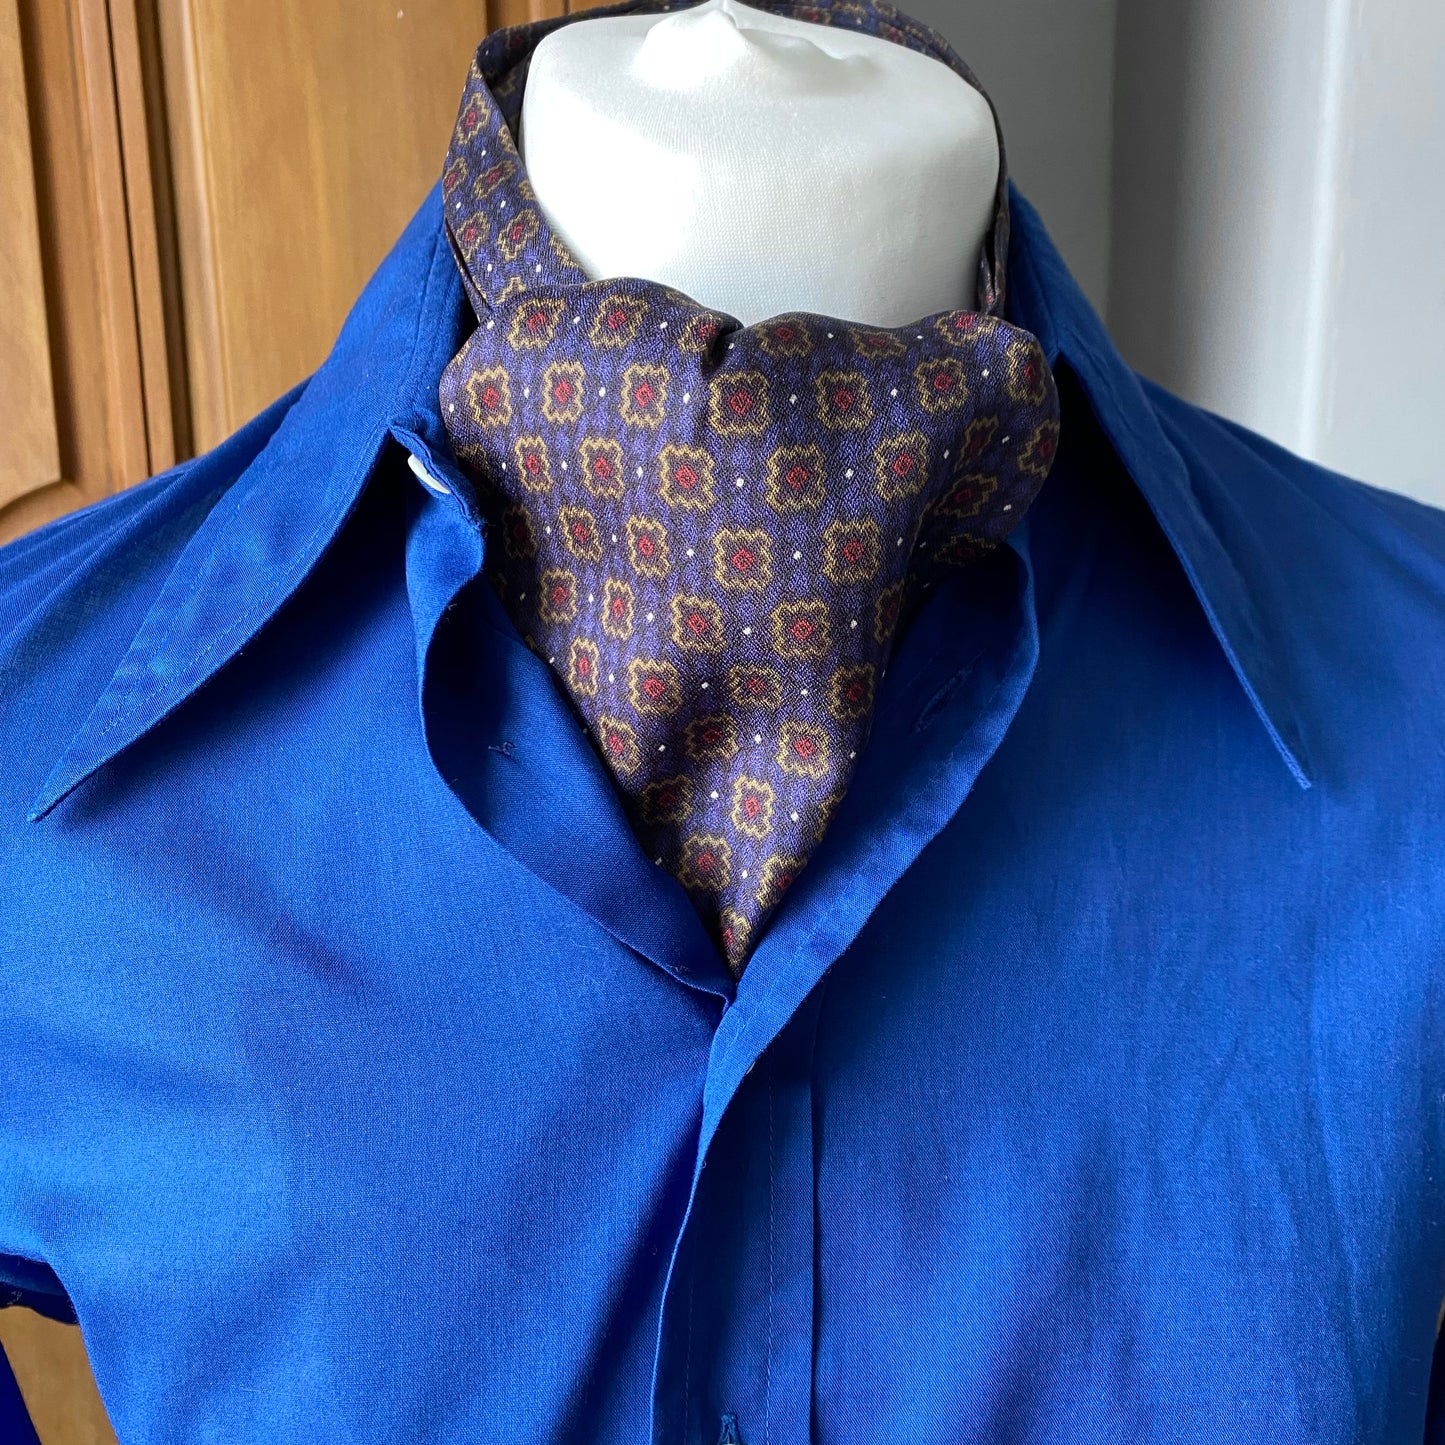 Mod style purple, gold, red and black tile print vintage cravat by British brand Duggie